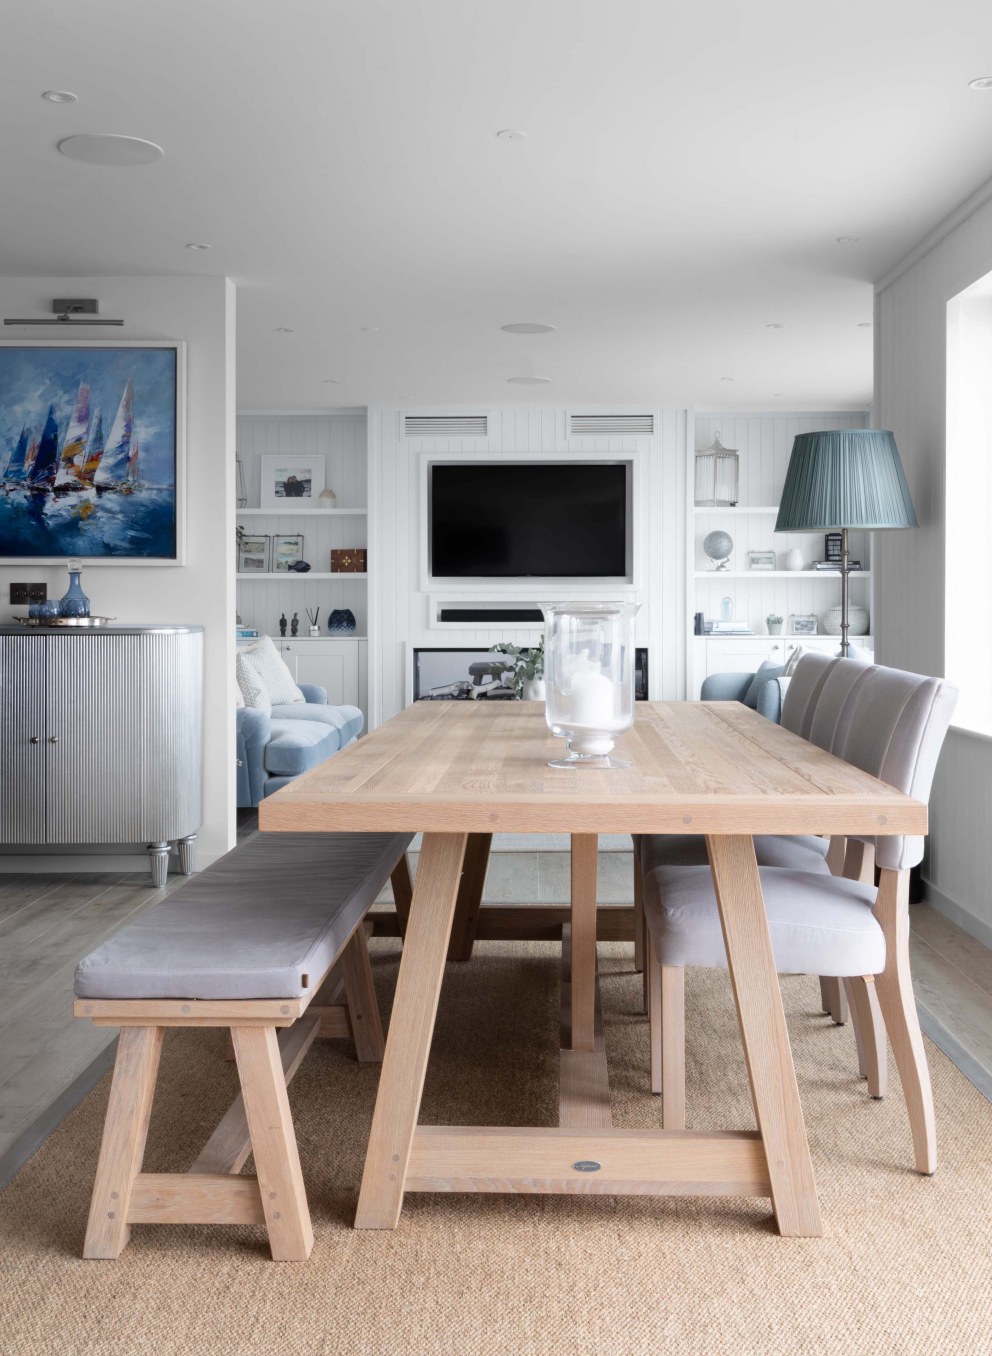 New build beach house, Abersoch, Wales | Dining area in open plan living space | Interior Designers